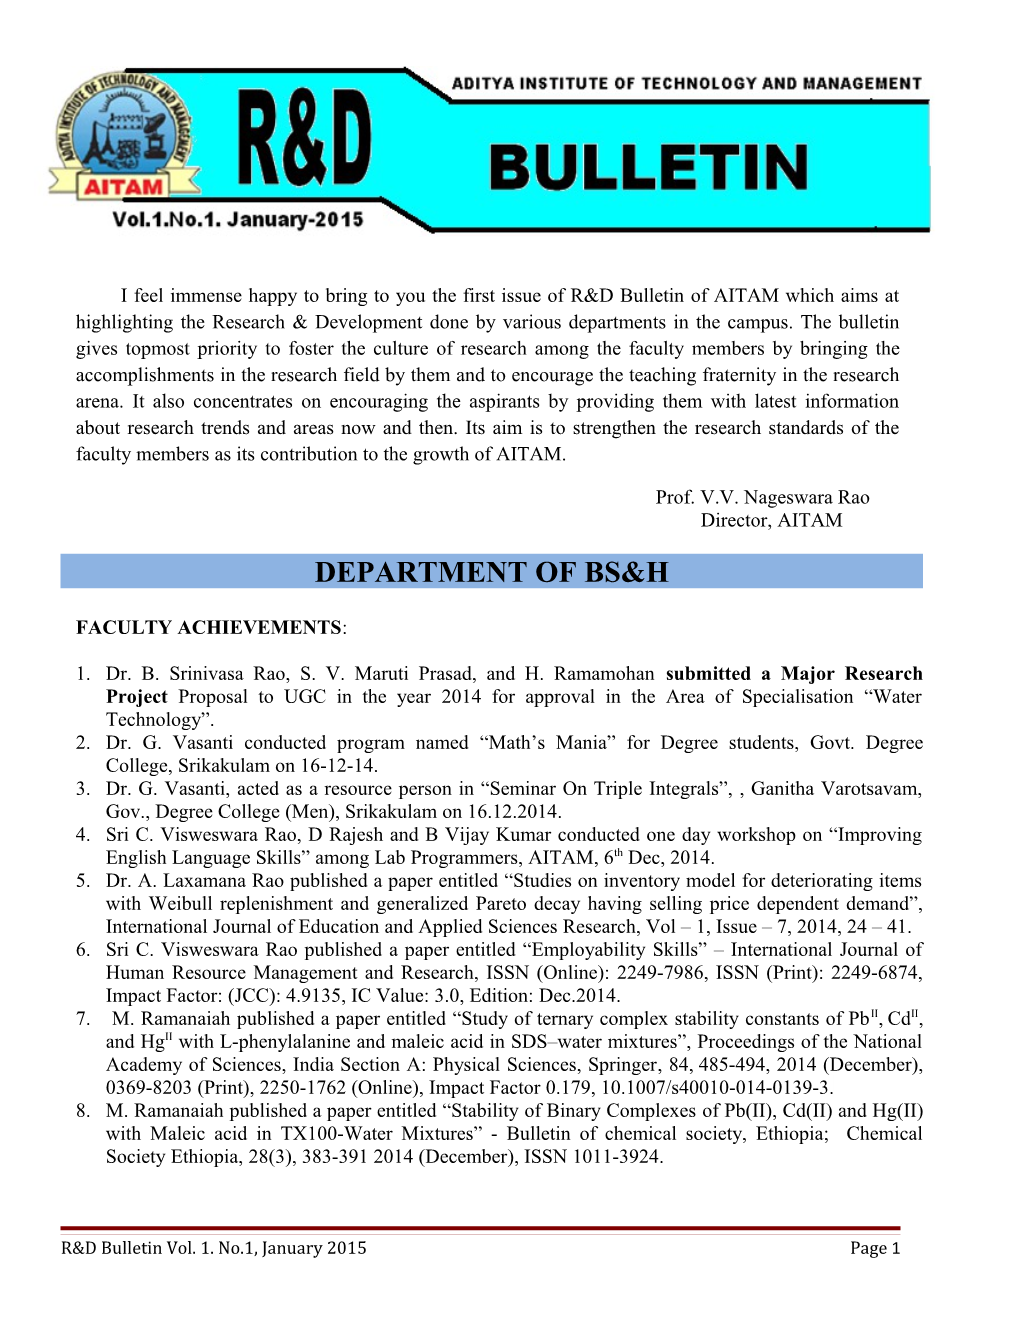 I Feel Immense Happy to Bring to You the First Issue of R&D Bulletin of AITAM Which Aims